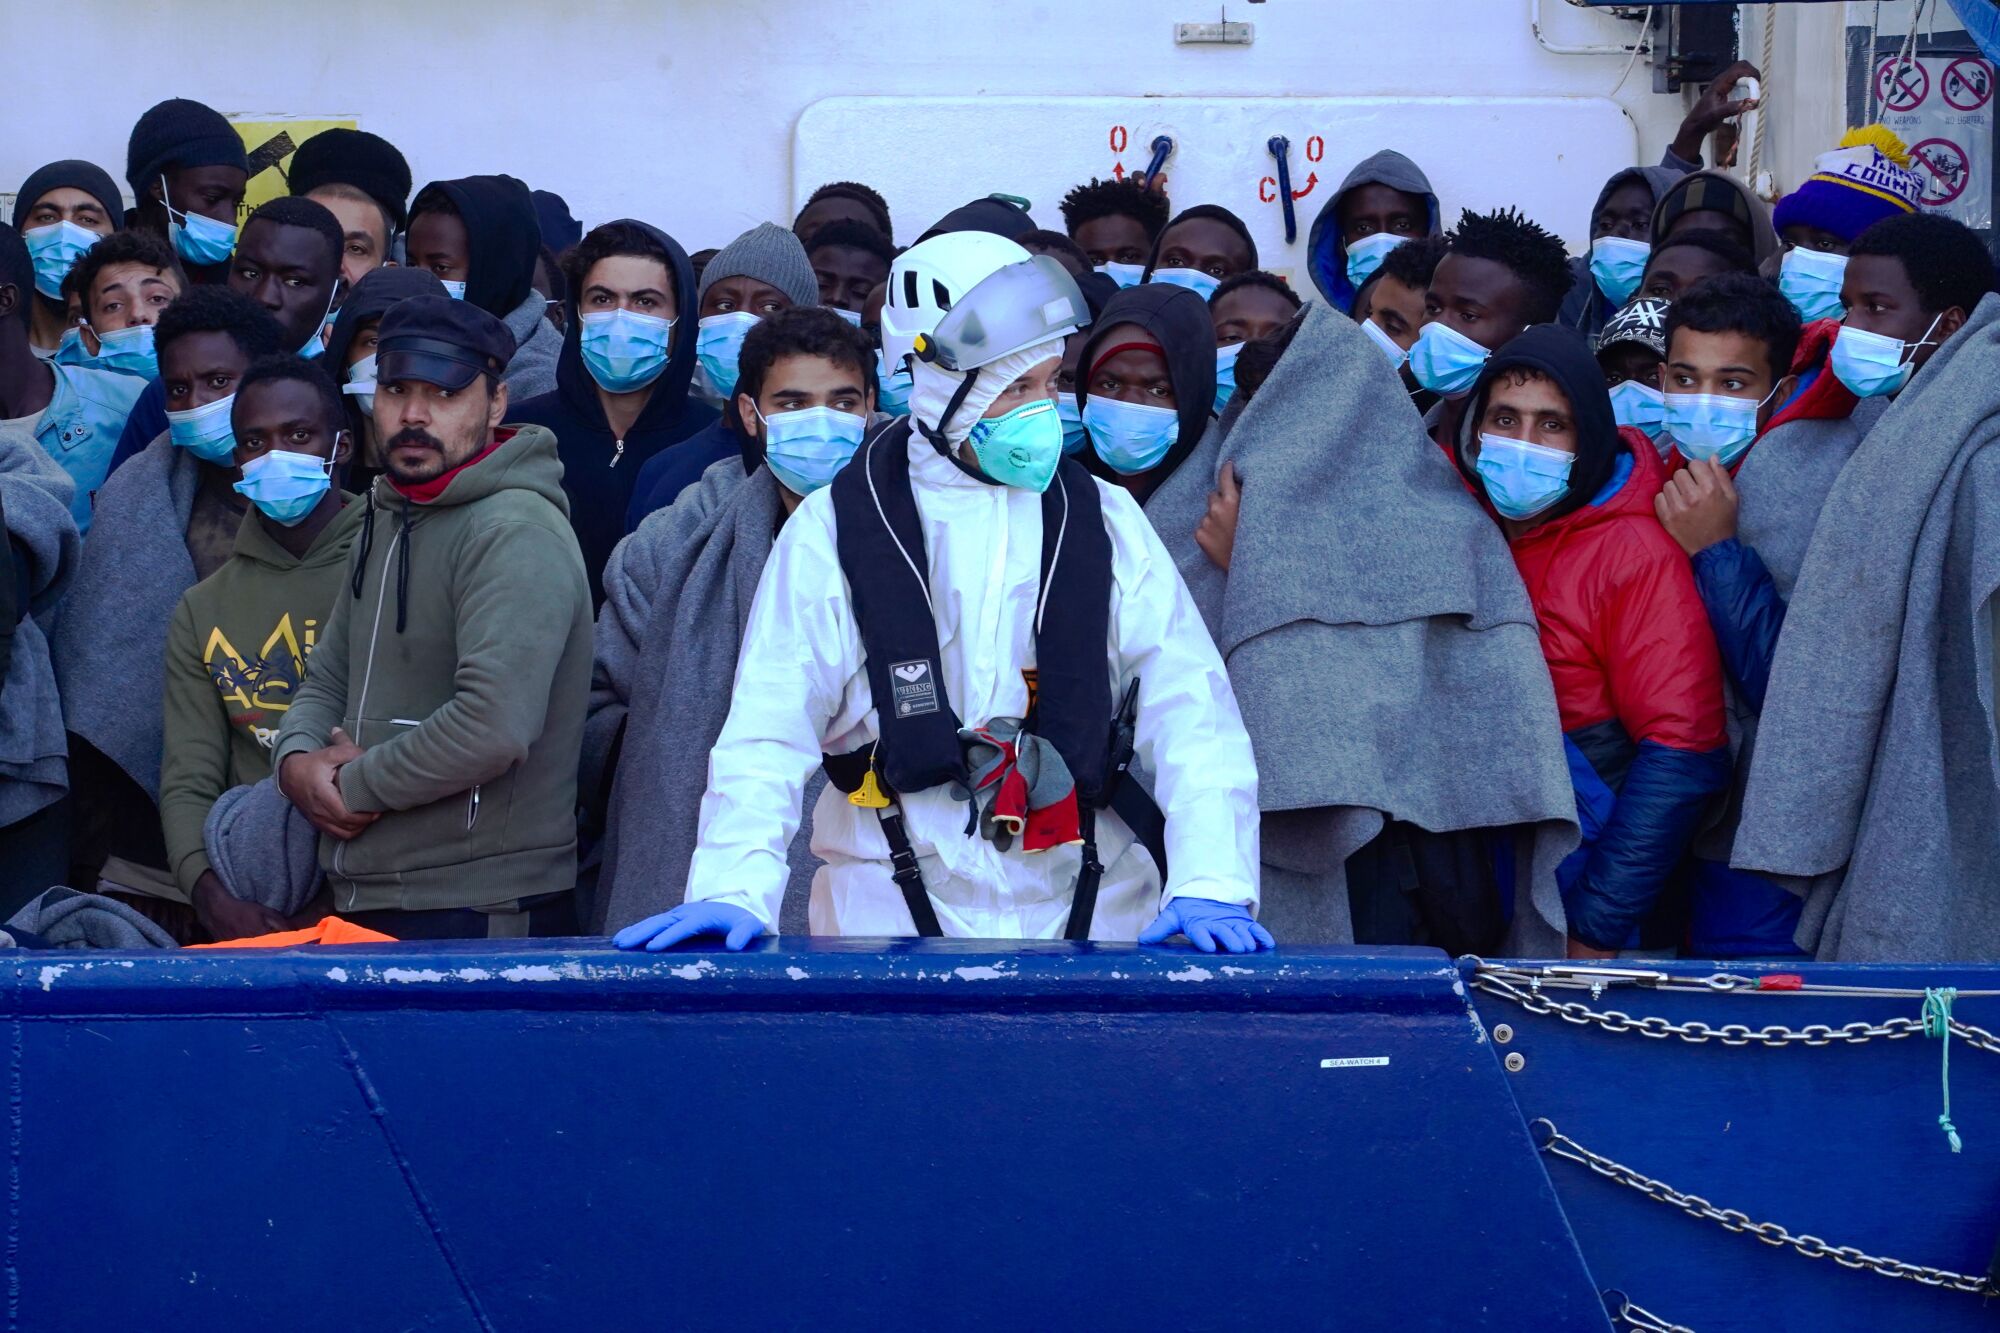 People in masks wait on a boat.